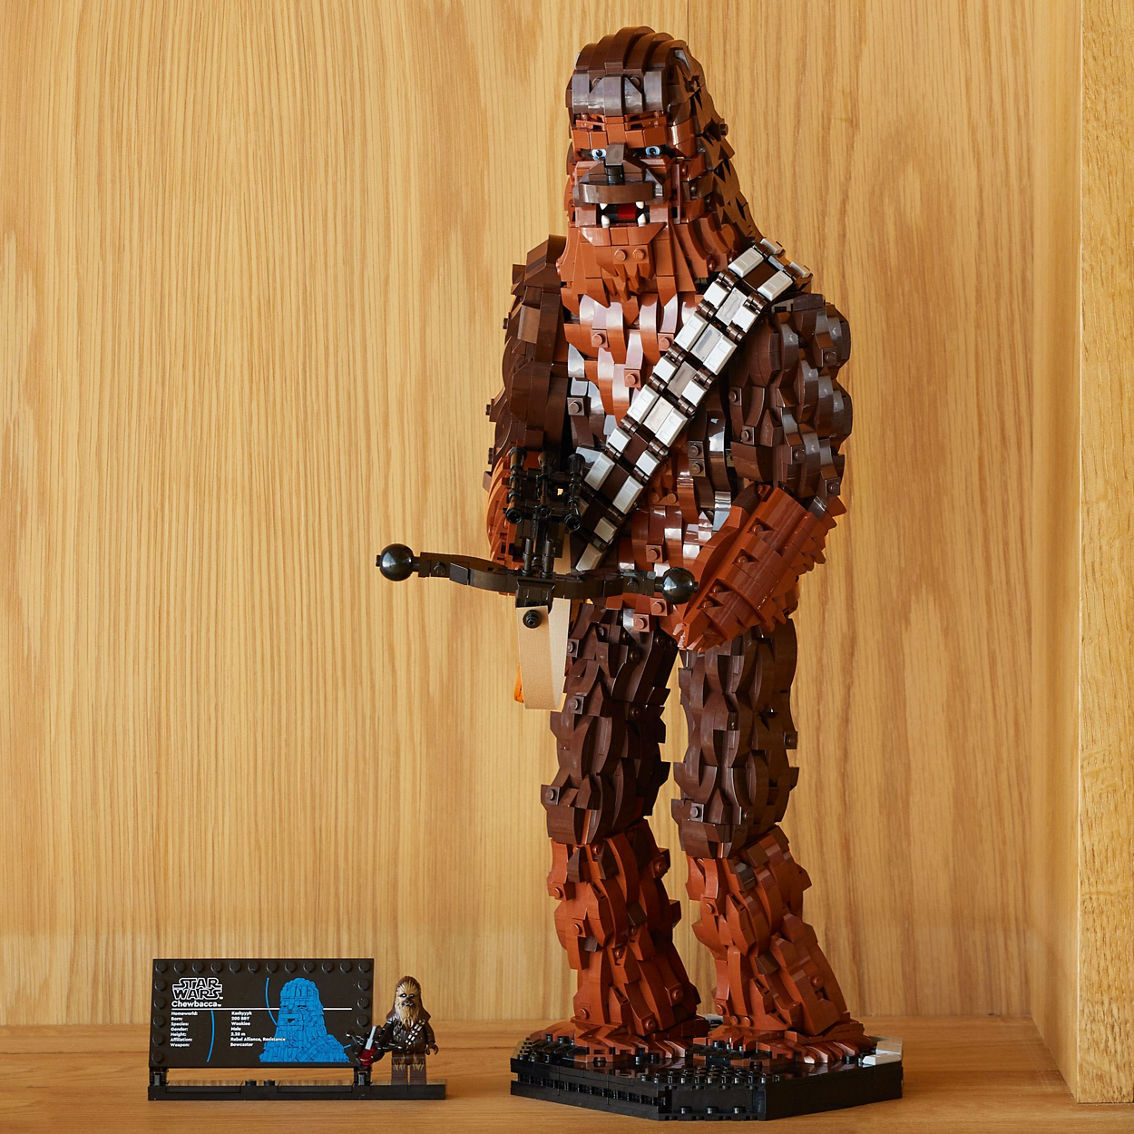 LEGO Star Wars Chewbacca Figure Building Set for Adults 75371 - Image 10 of 10